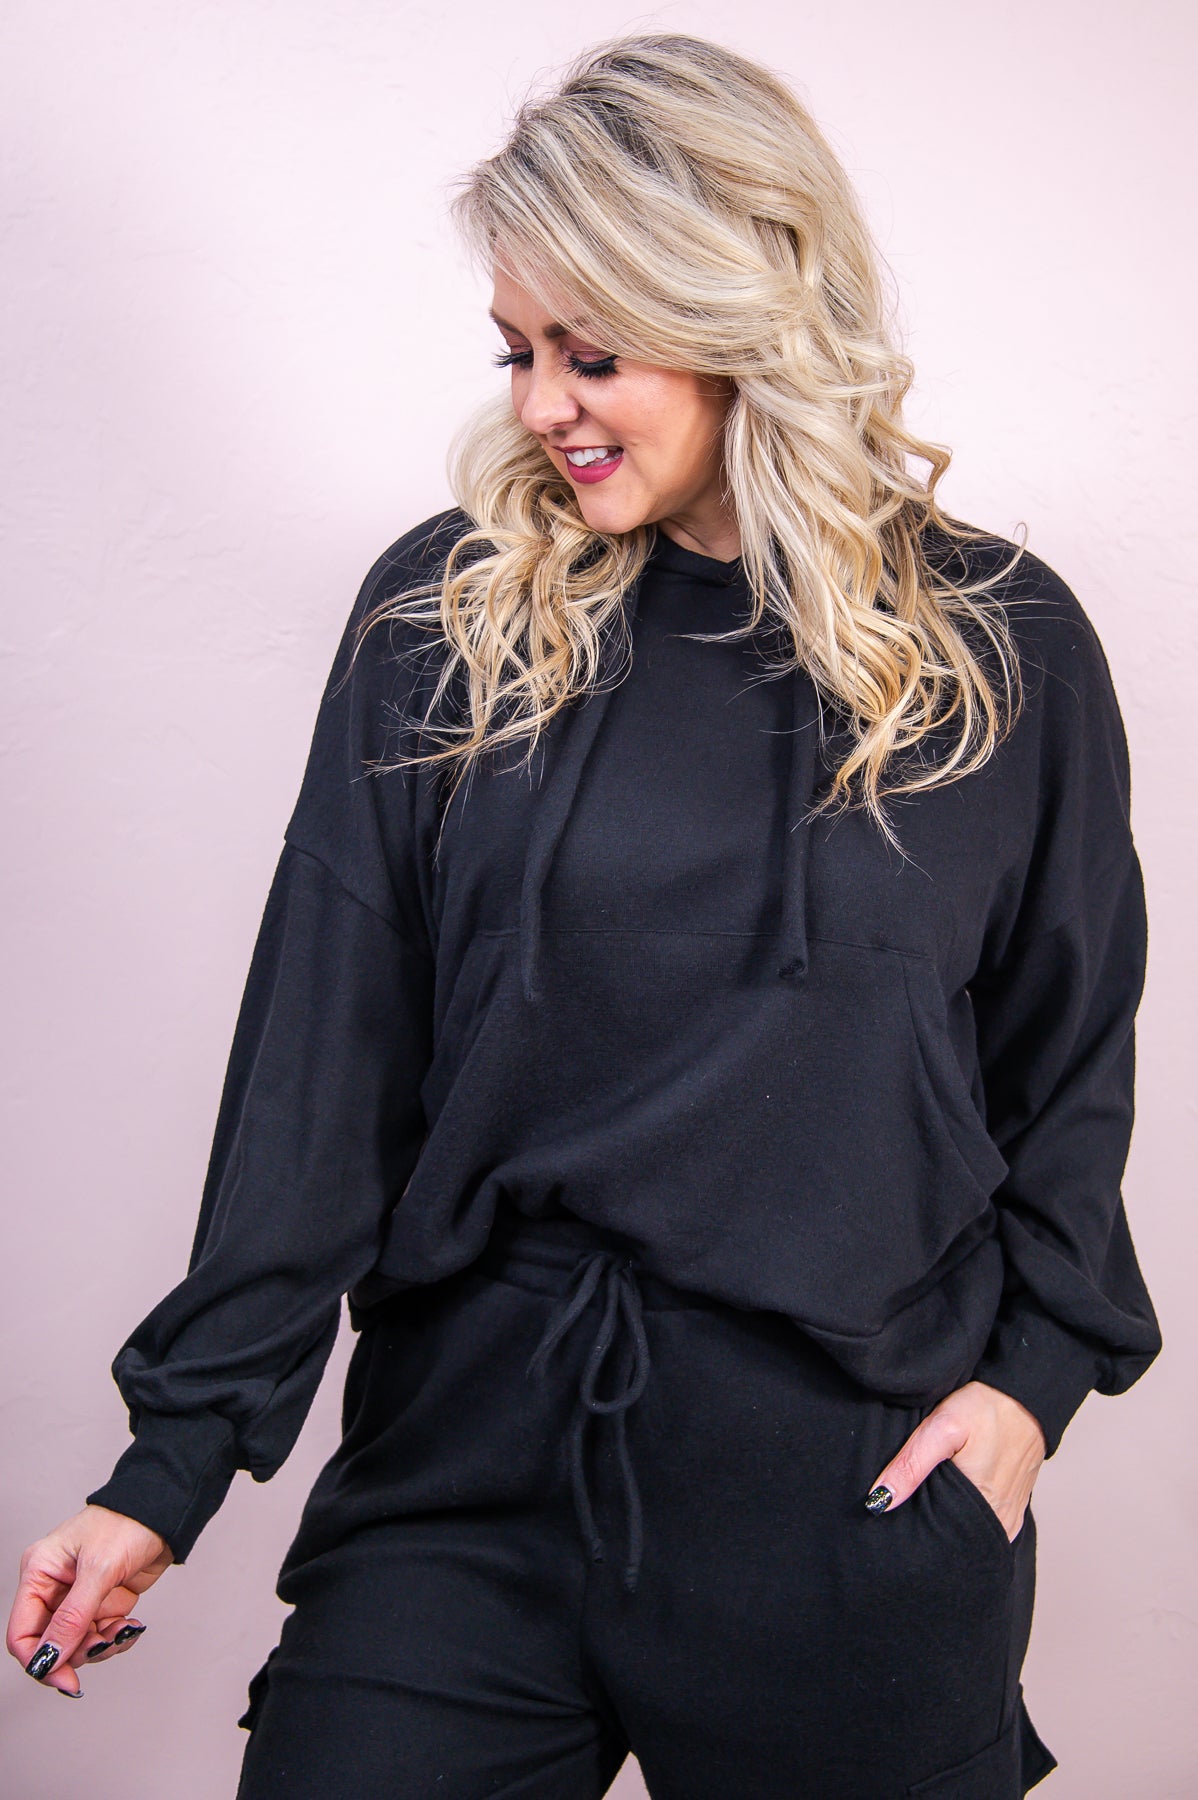 Living That Cozy Life Black Solid Hooded Top - T8726BK